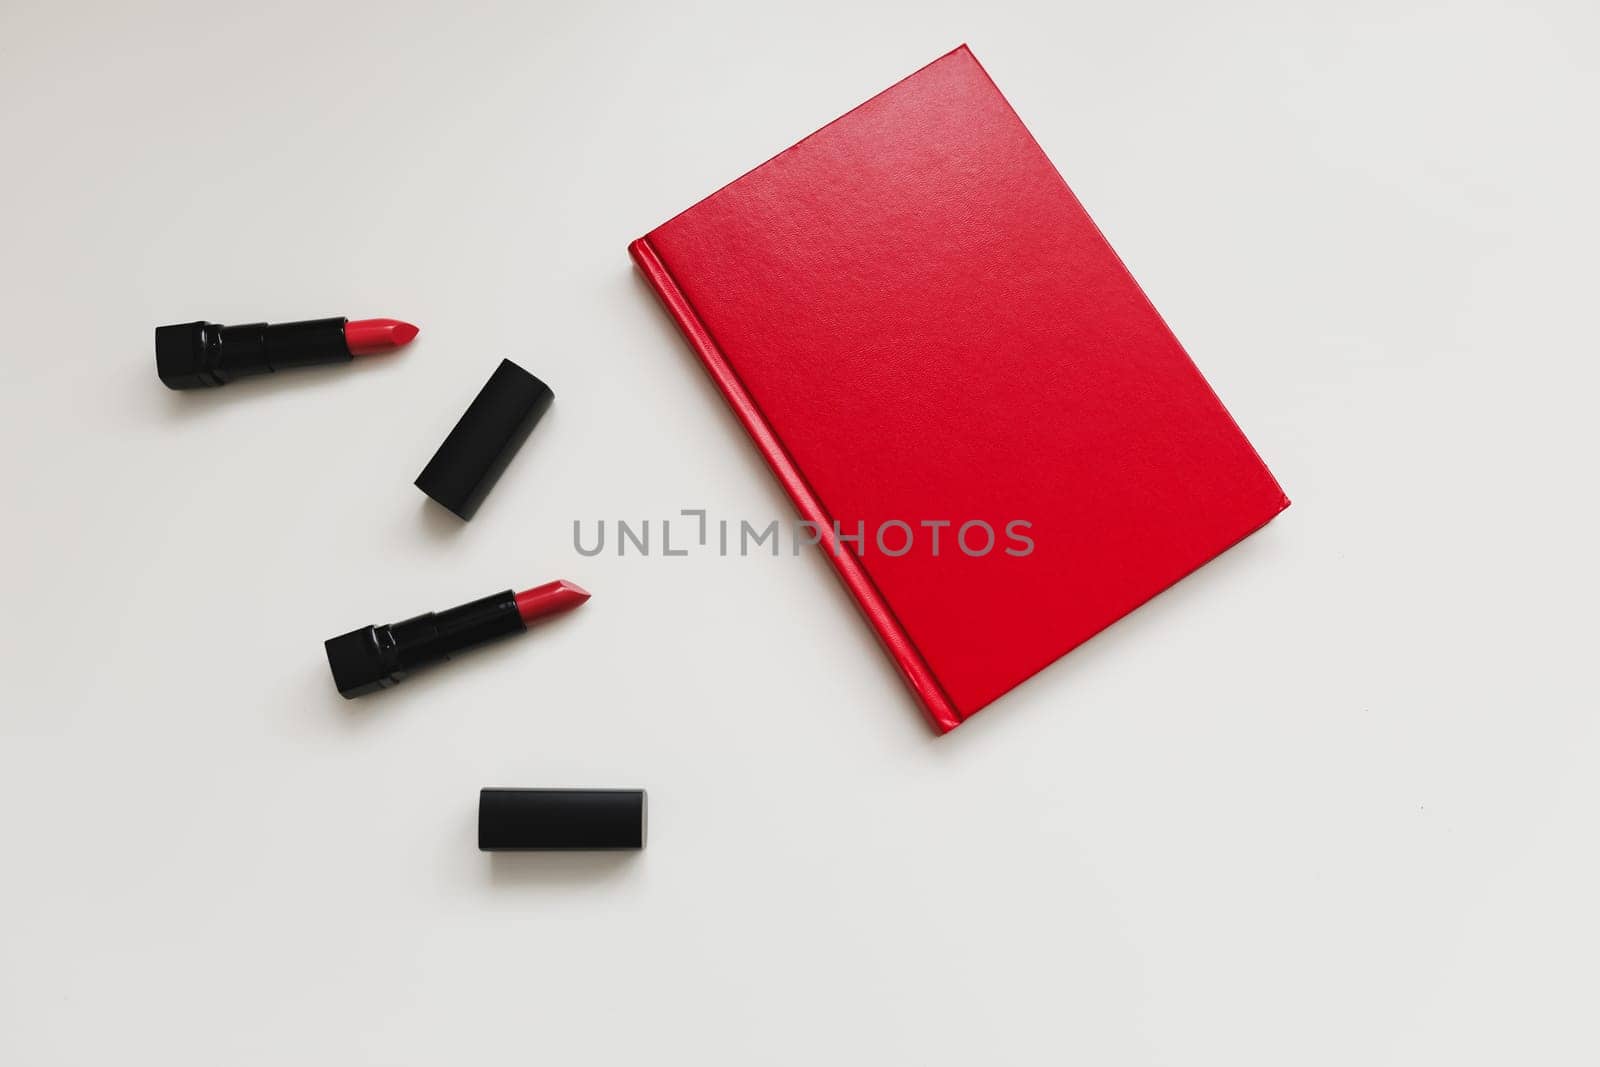 Concept Women's Day, Valentines Day, March 8. Red book and lipsticks, cosmetic makeup products and accessories flatlay top view by paralisart